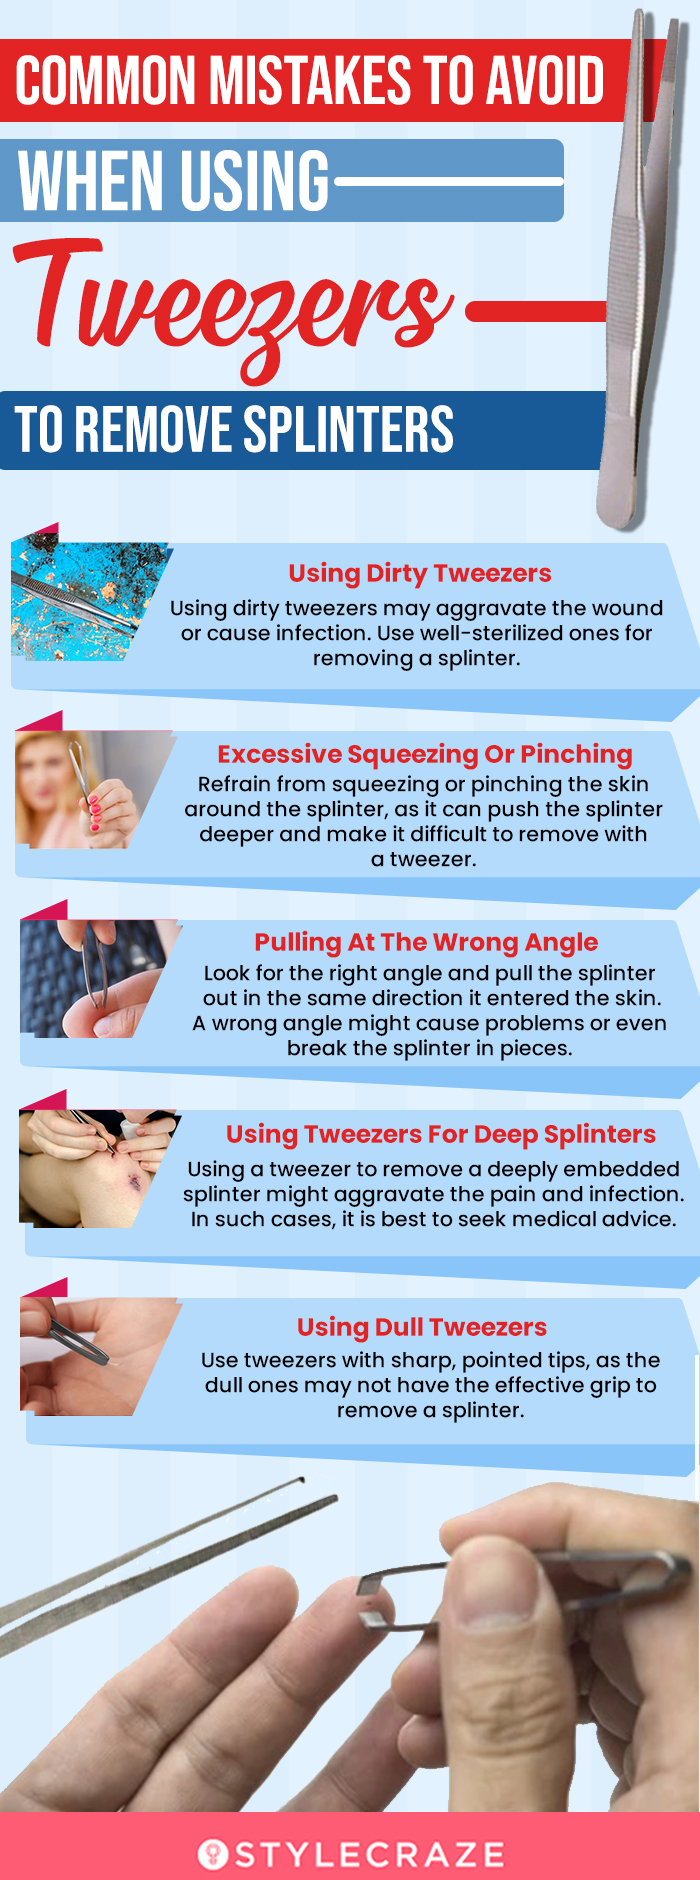 Common Mistakes To Avoid When Using Tweezers To Remove Splinters (infographic)